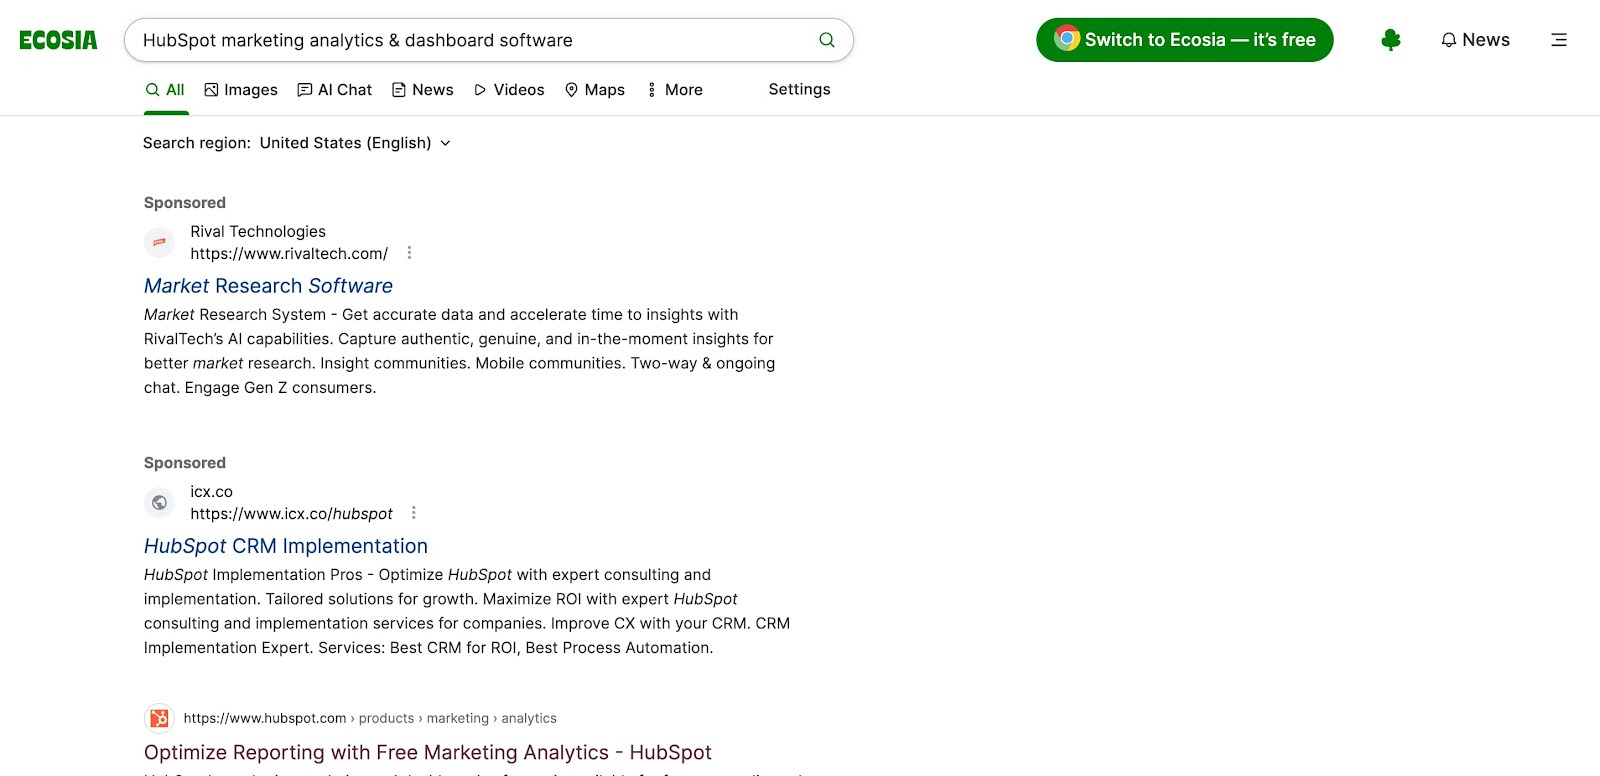 Ecosia search engine results page for “HubSpot marketing analytics & dashboard software.”